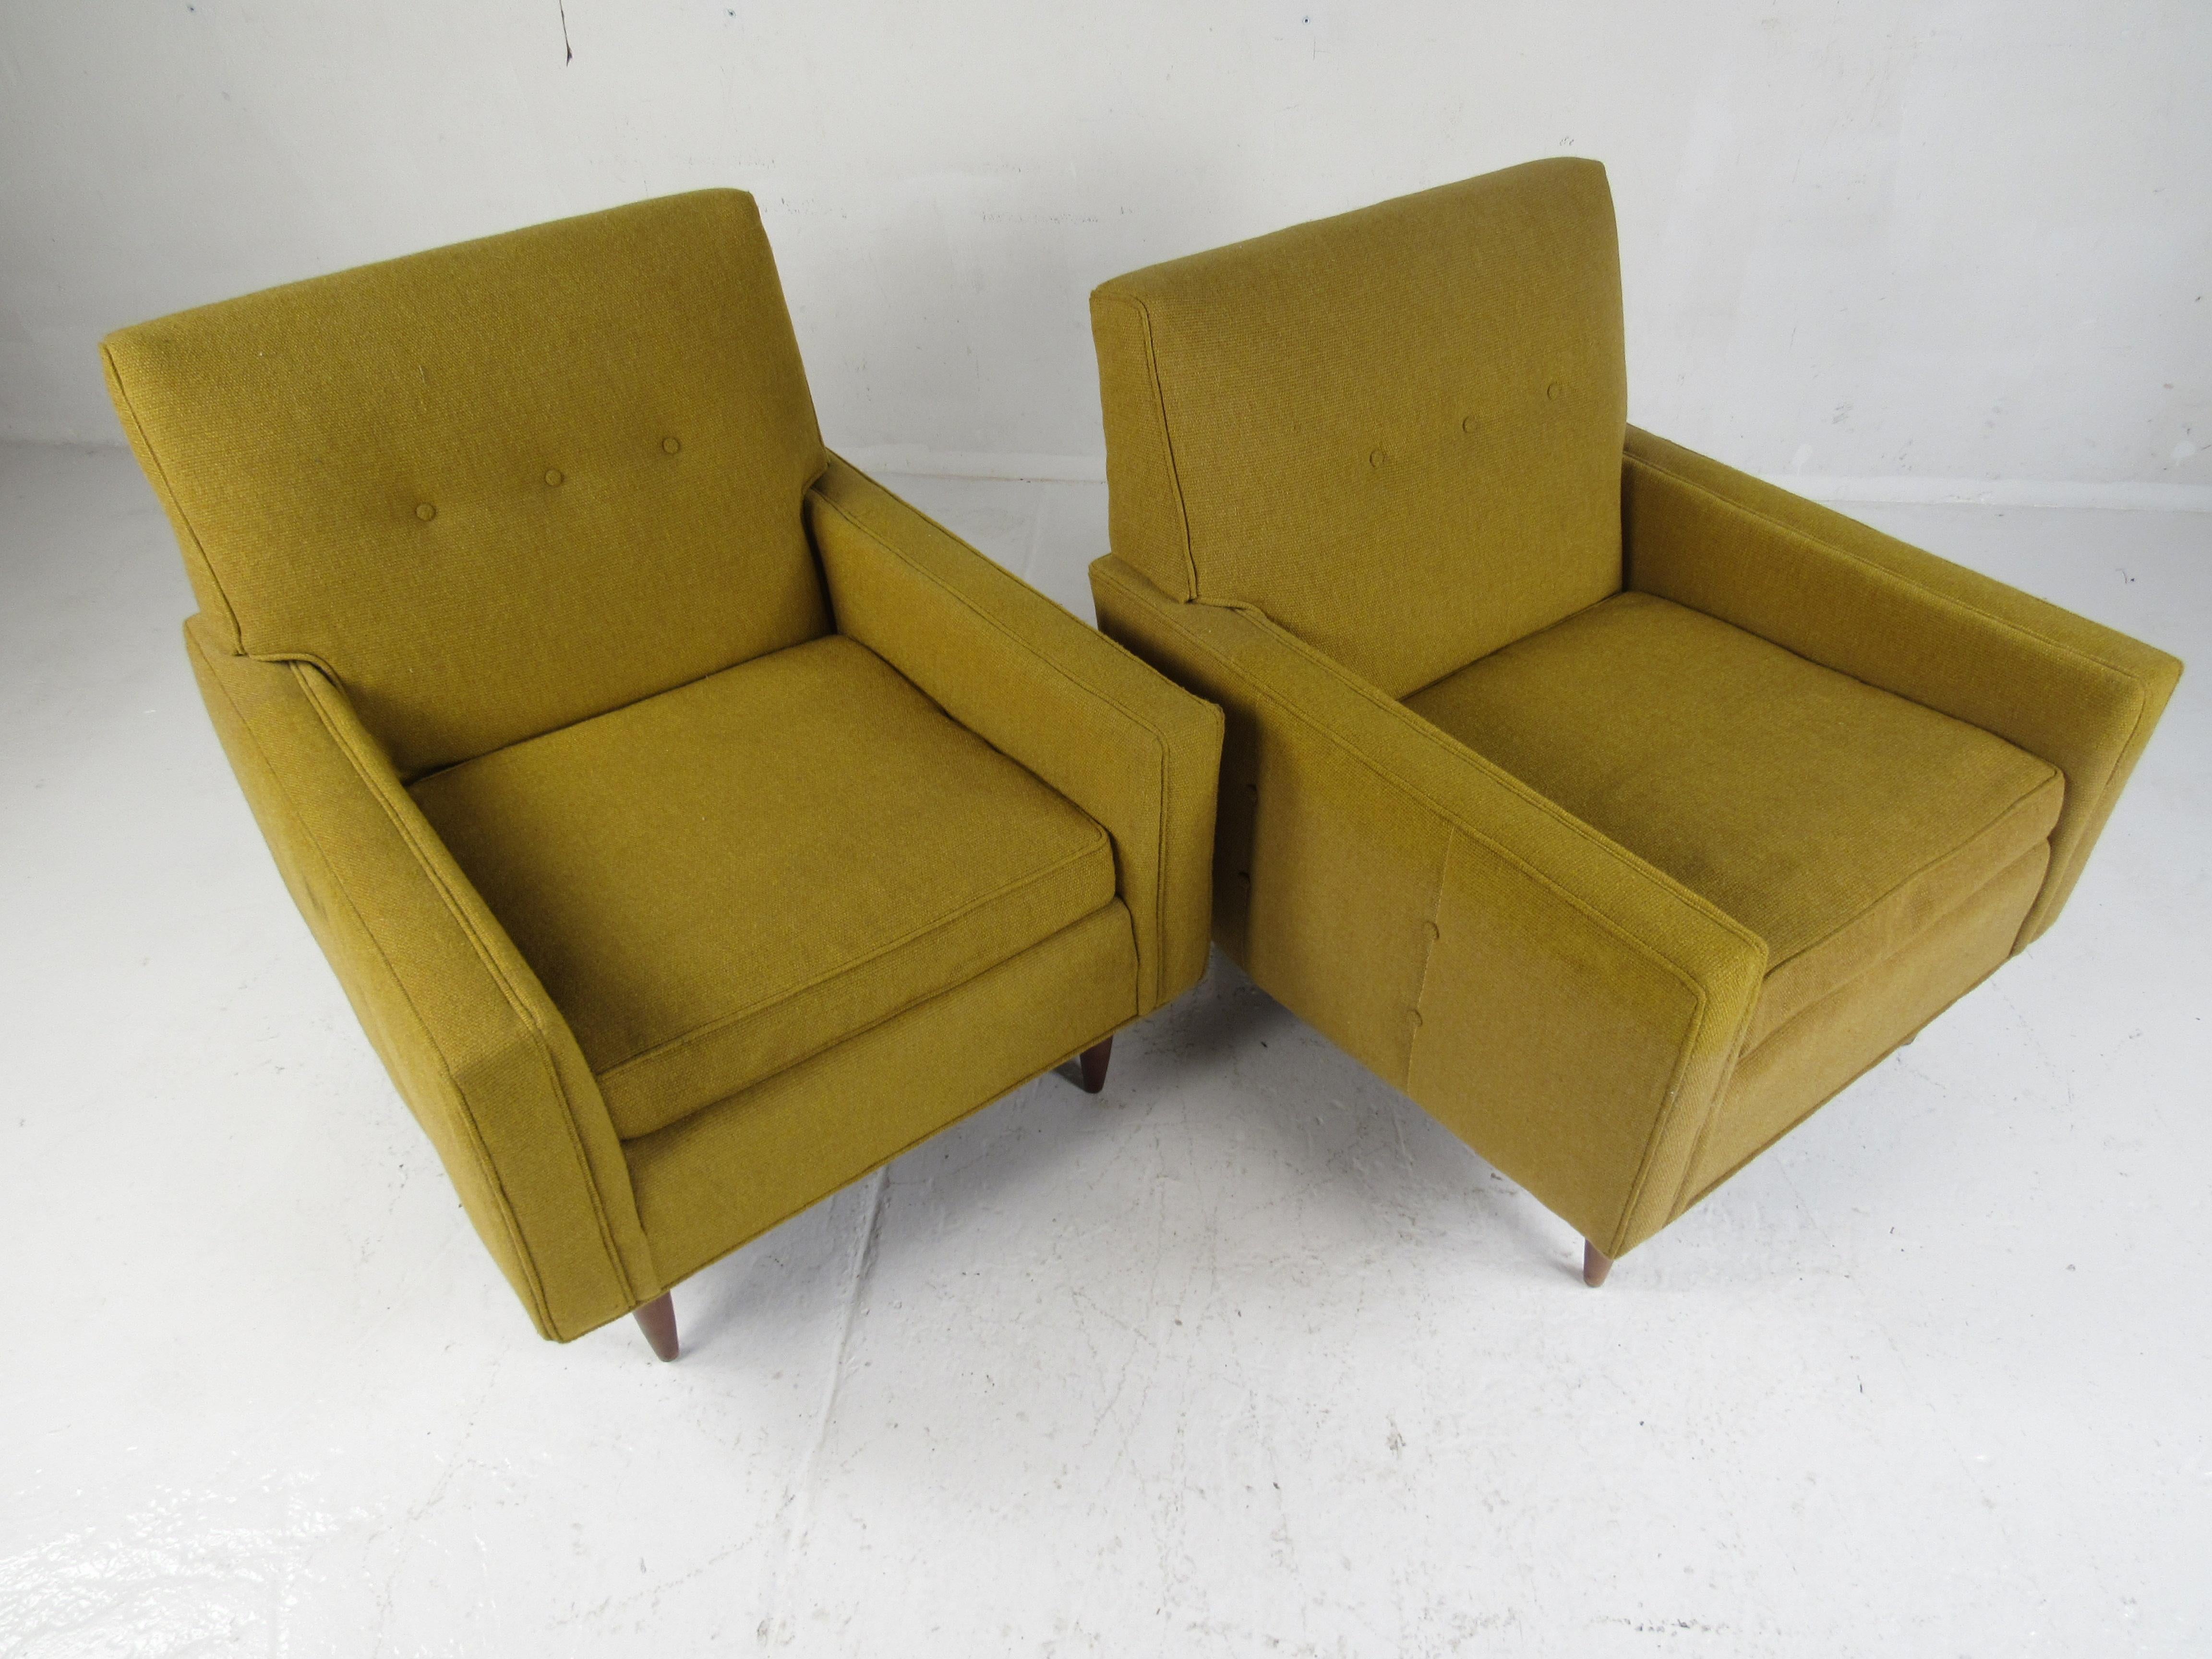 A comfortable and stylish pair of vintage modern club chairs by Rowe. Wonderful design with gently used green tufted upholstery and stubby walnut legs. This lovely pair of chairs make the perfect eye-catching addition to any seating arrangement.